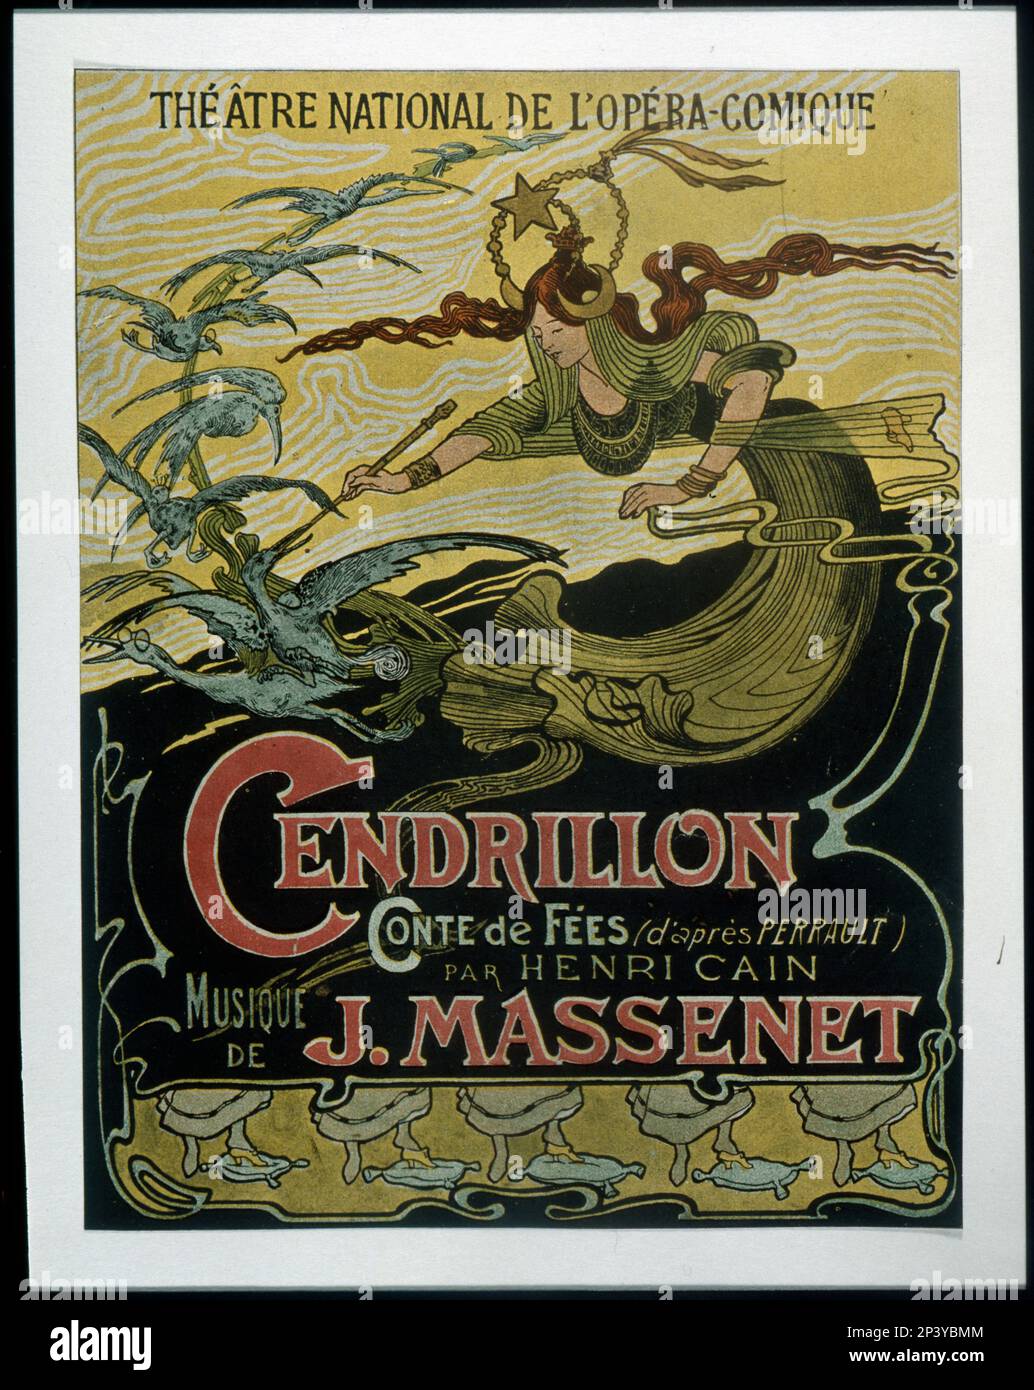 Publicity of the play 'Cendrillon 'with music by J.Massenet, premiered at the Comic Opera Theater in Paris, 1899. Stock Photo